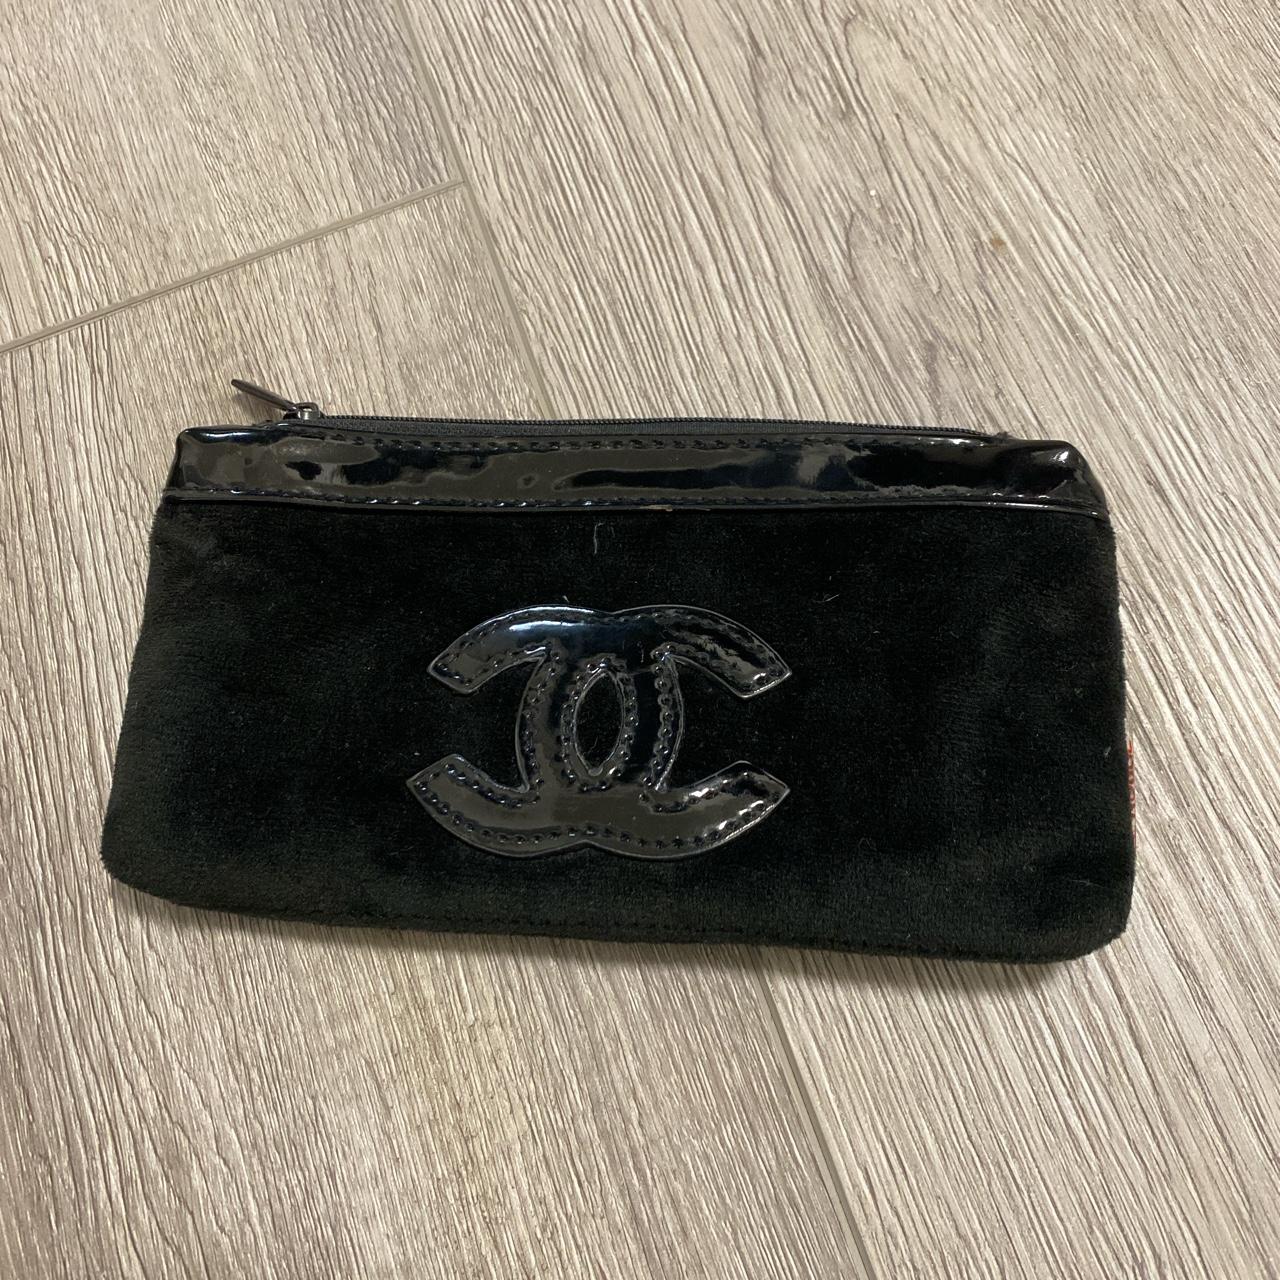 CHANEL Maquillage 2011 Vintage New Cosmetic Bag Black Faux Patent Leather  6.5x4